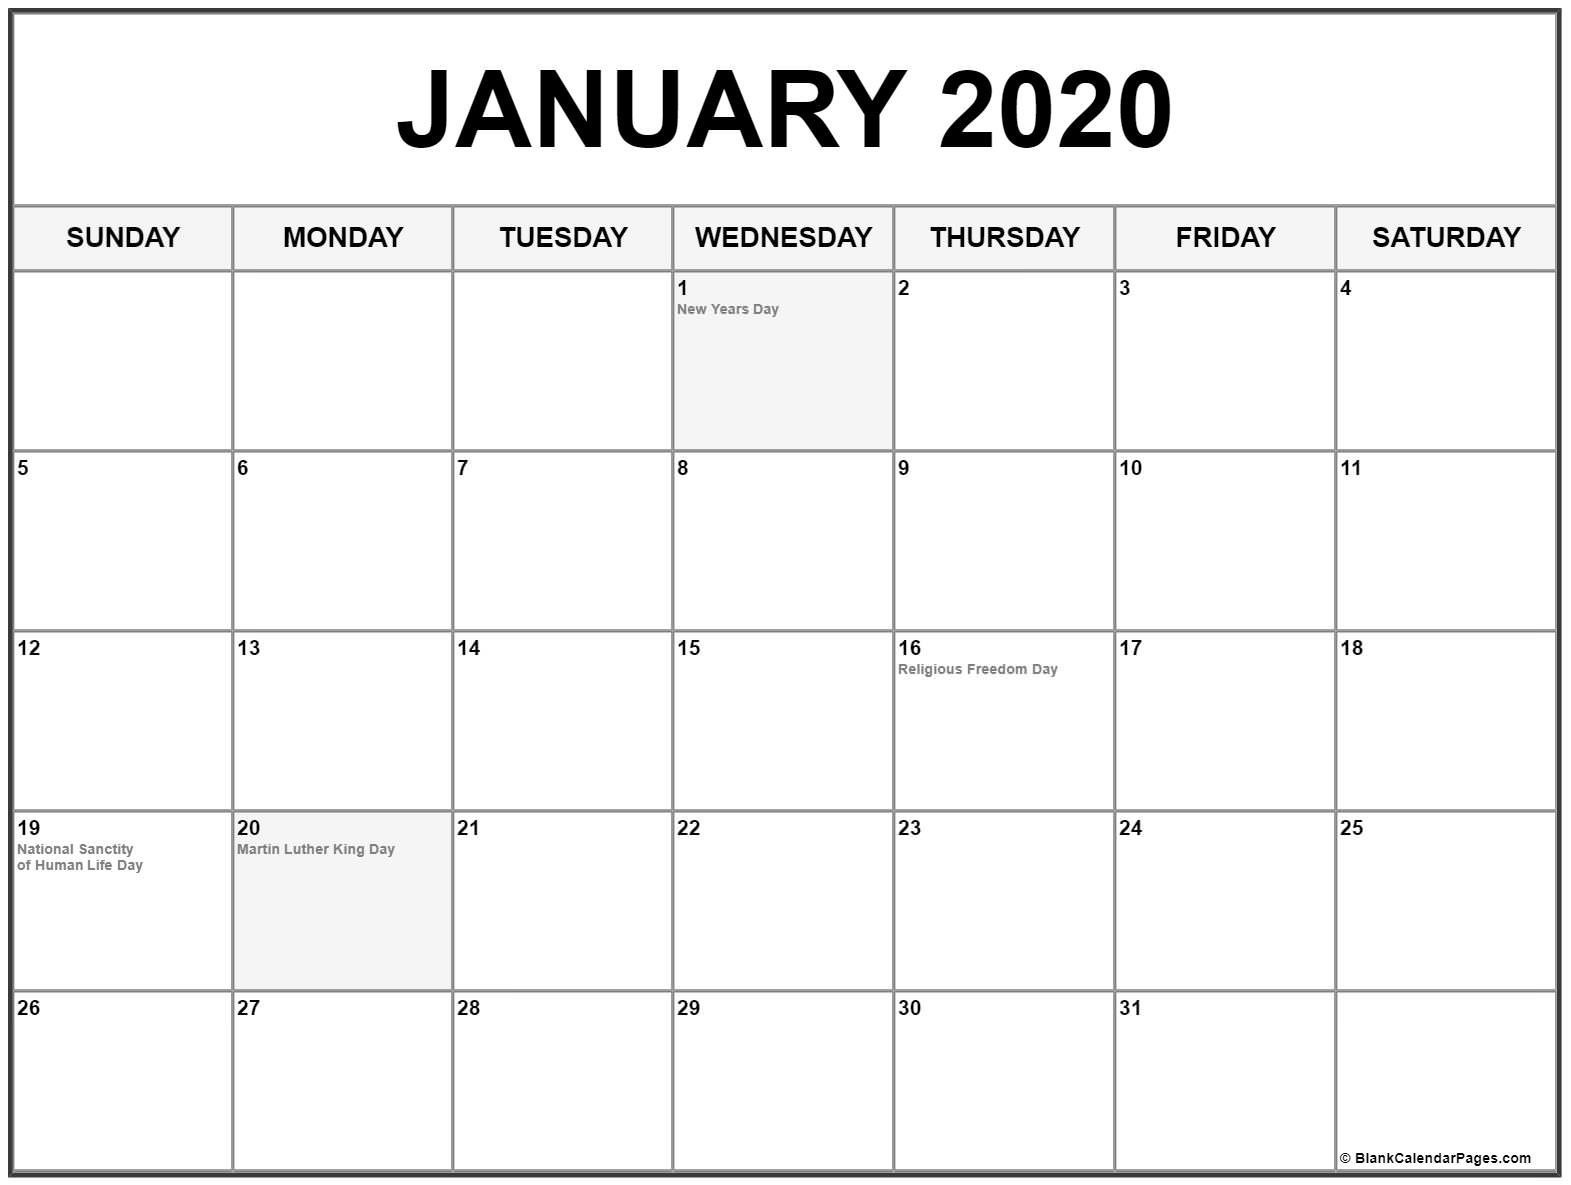 January Calendar Holidays - Colona.rsd7 Calendar Of Religious Events For Canadian Jews In 2020